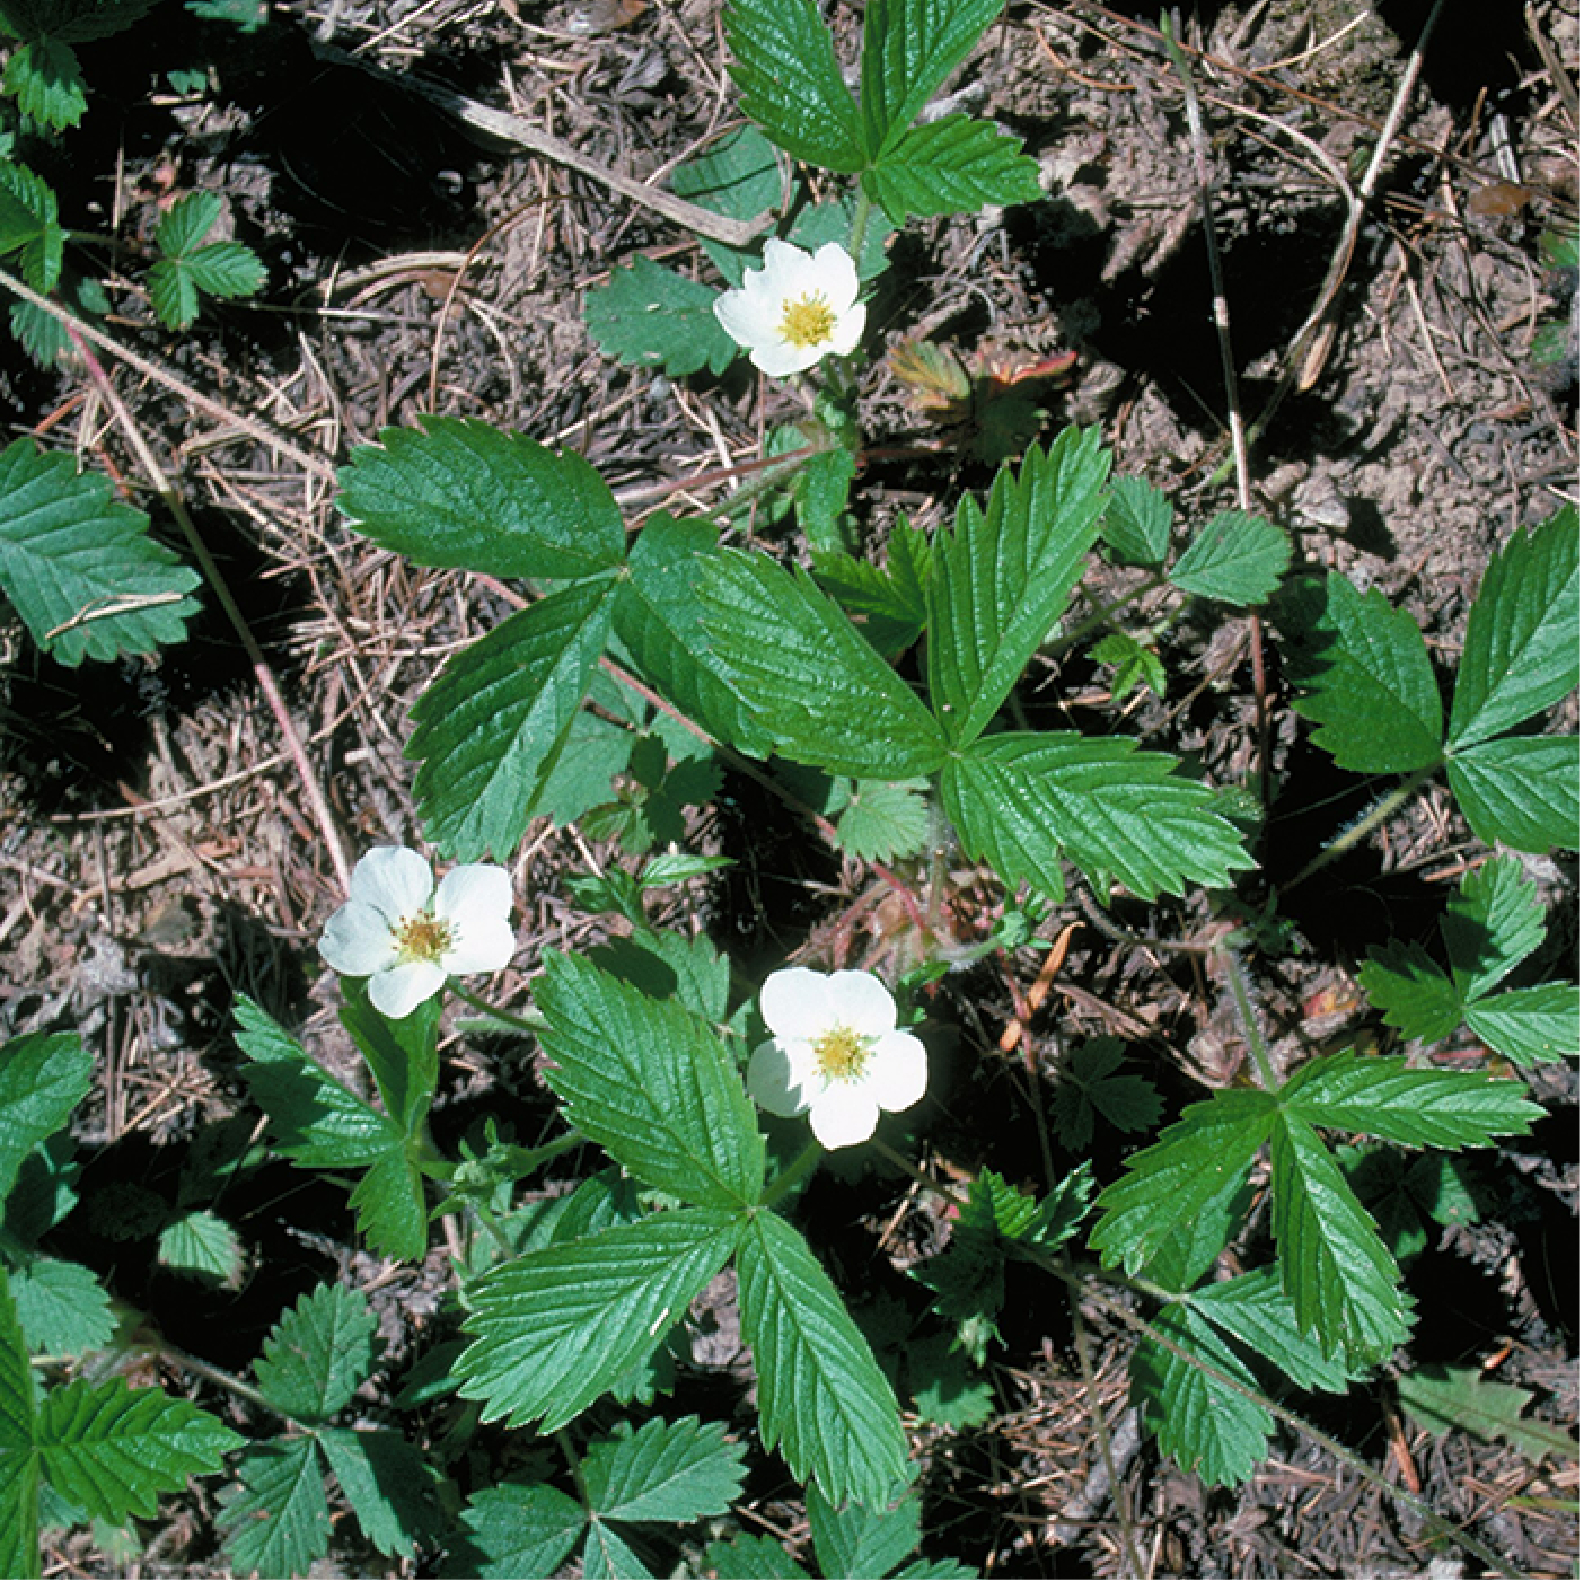 A close up of leaves in clusters of three and three white flowers.